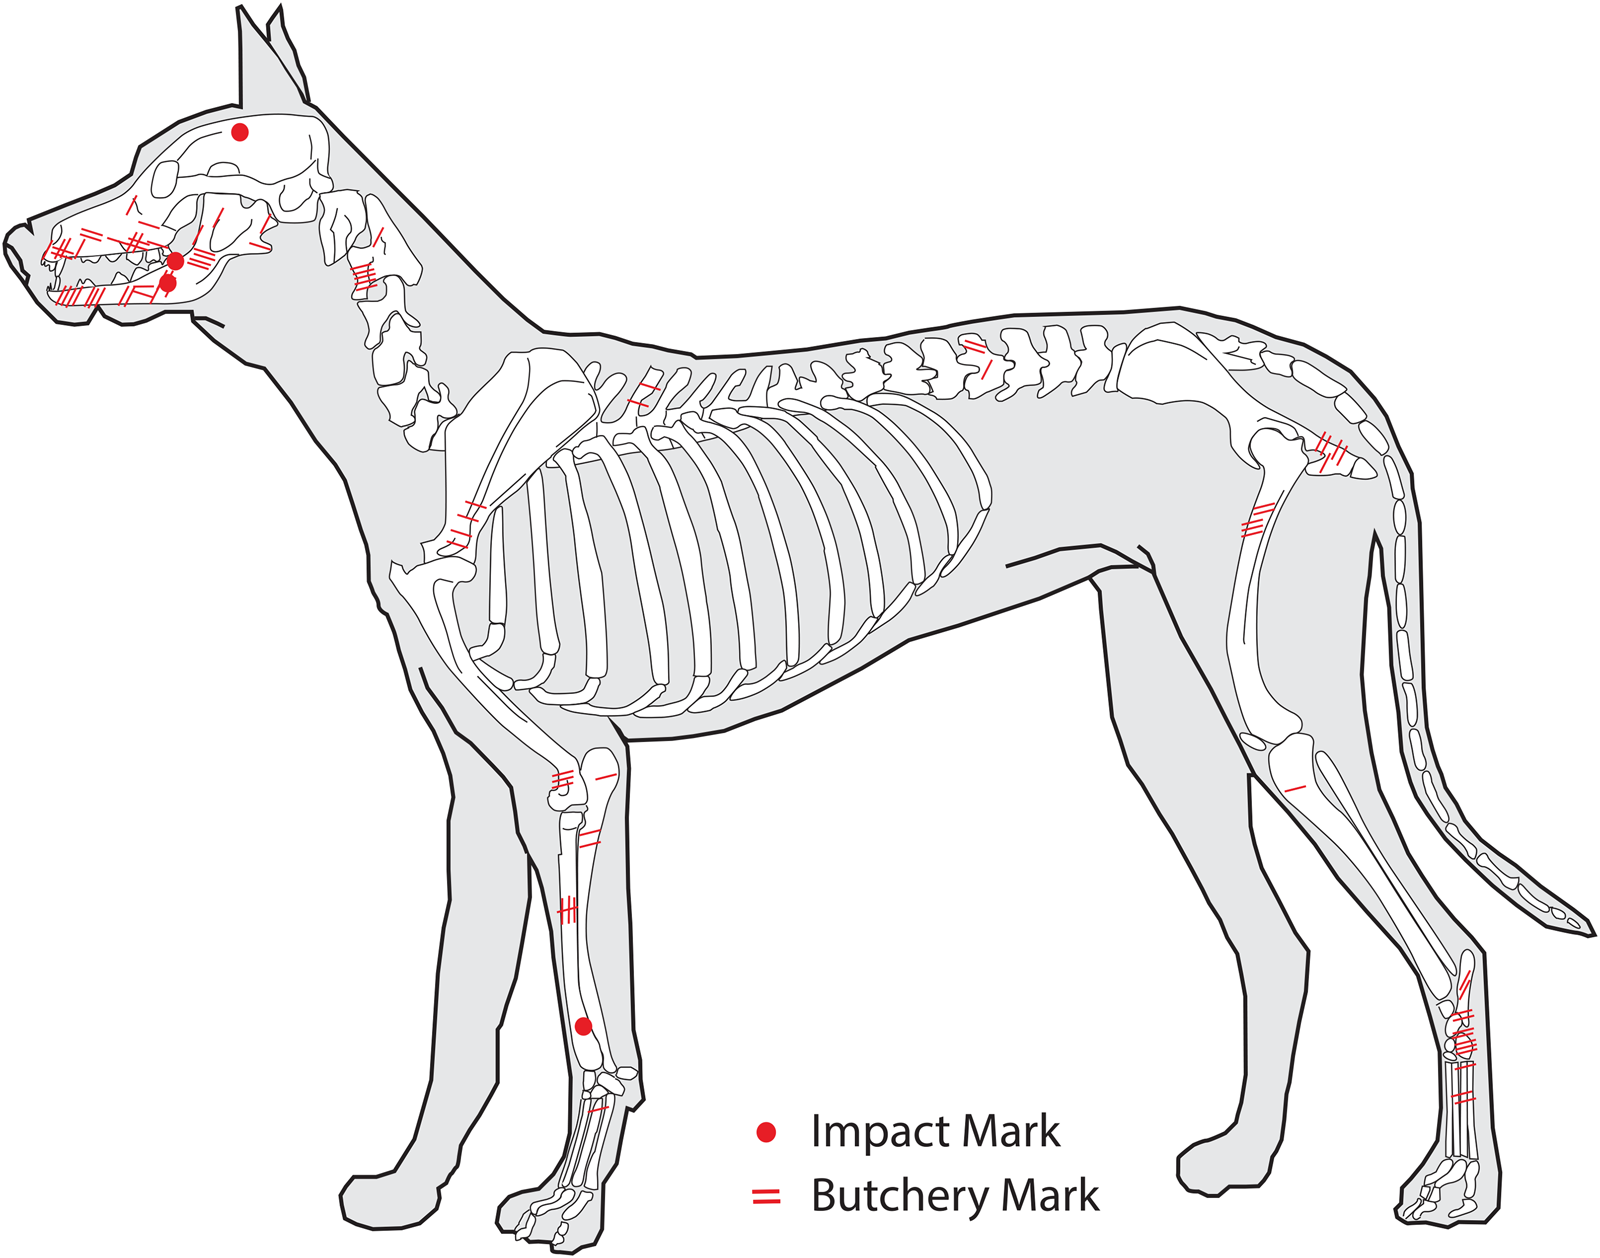 Map of butchery and impact marks across dog skeletons